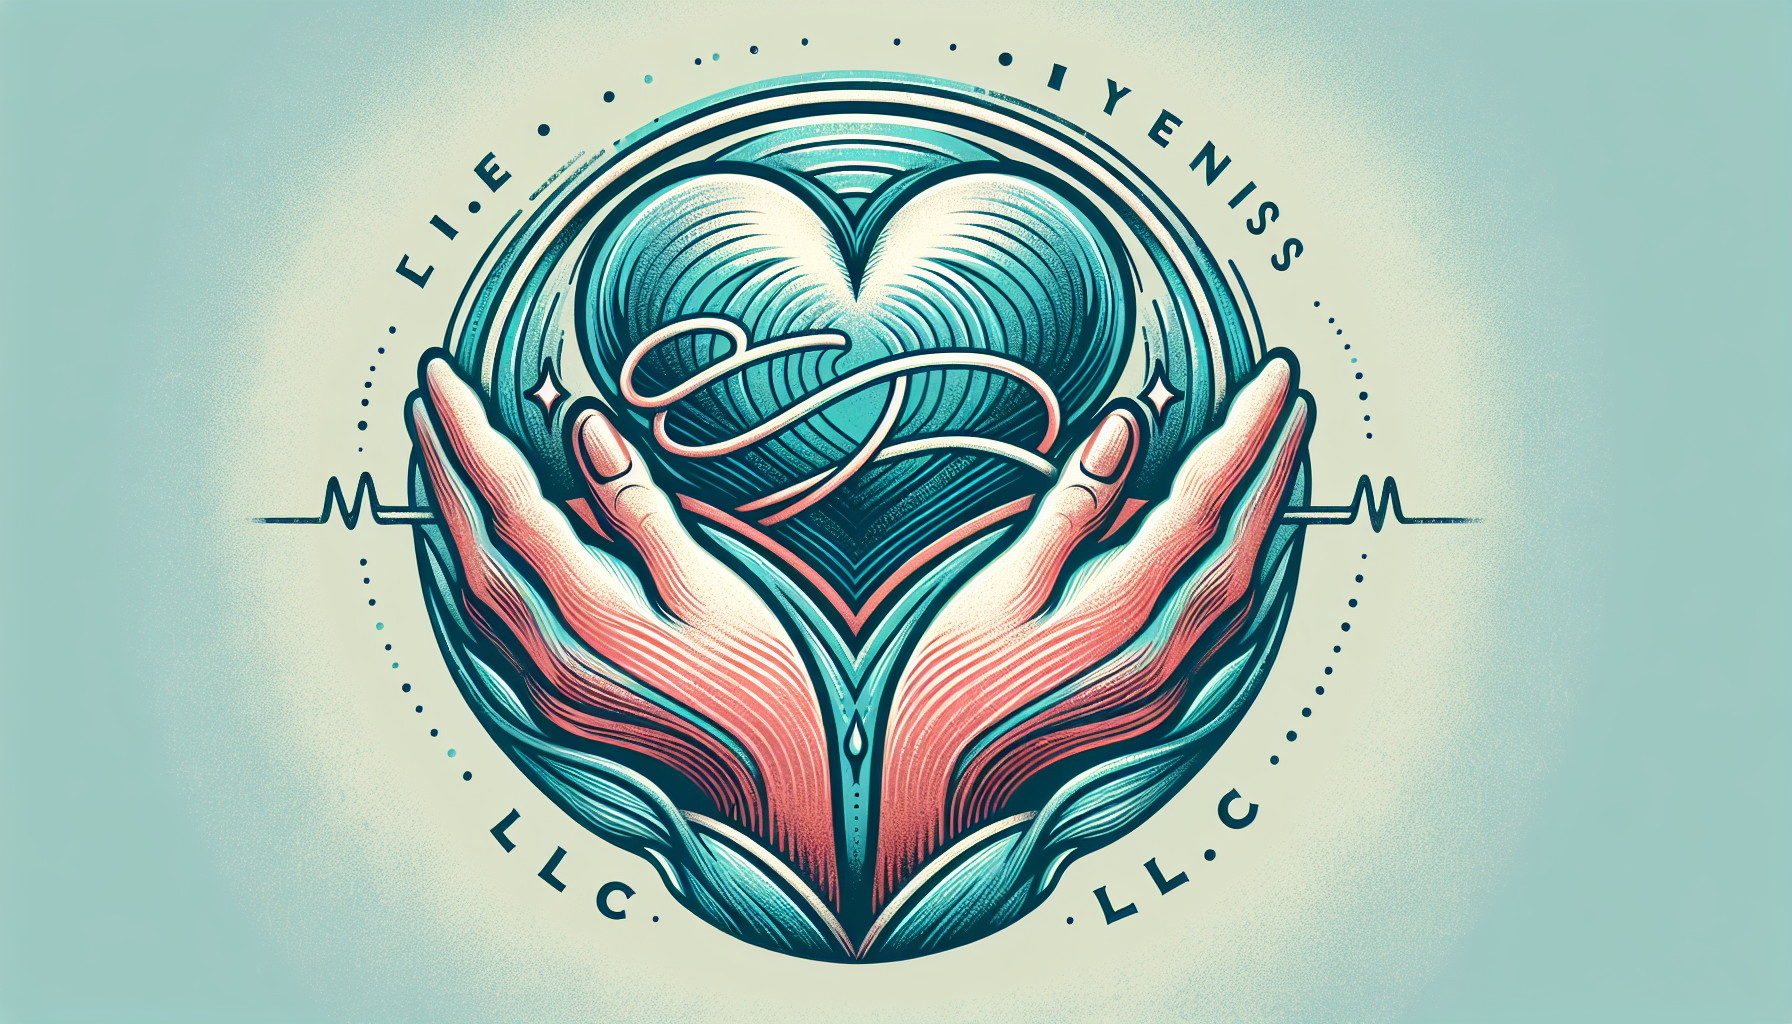 Illustration Of A Healthcare And Wellness Logo With 'Llc'